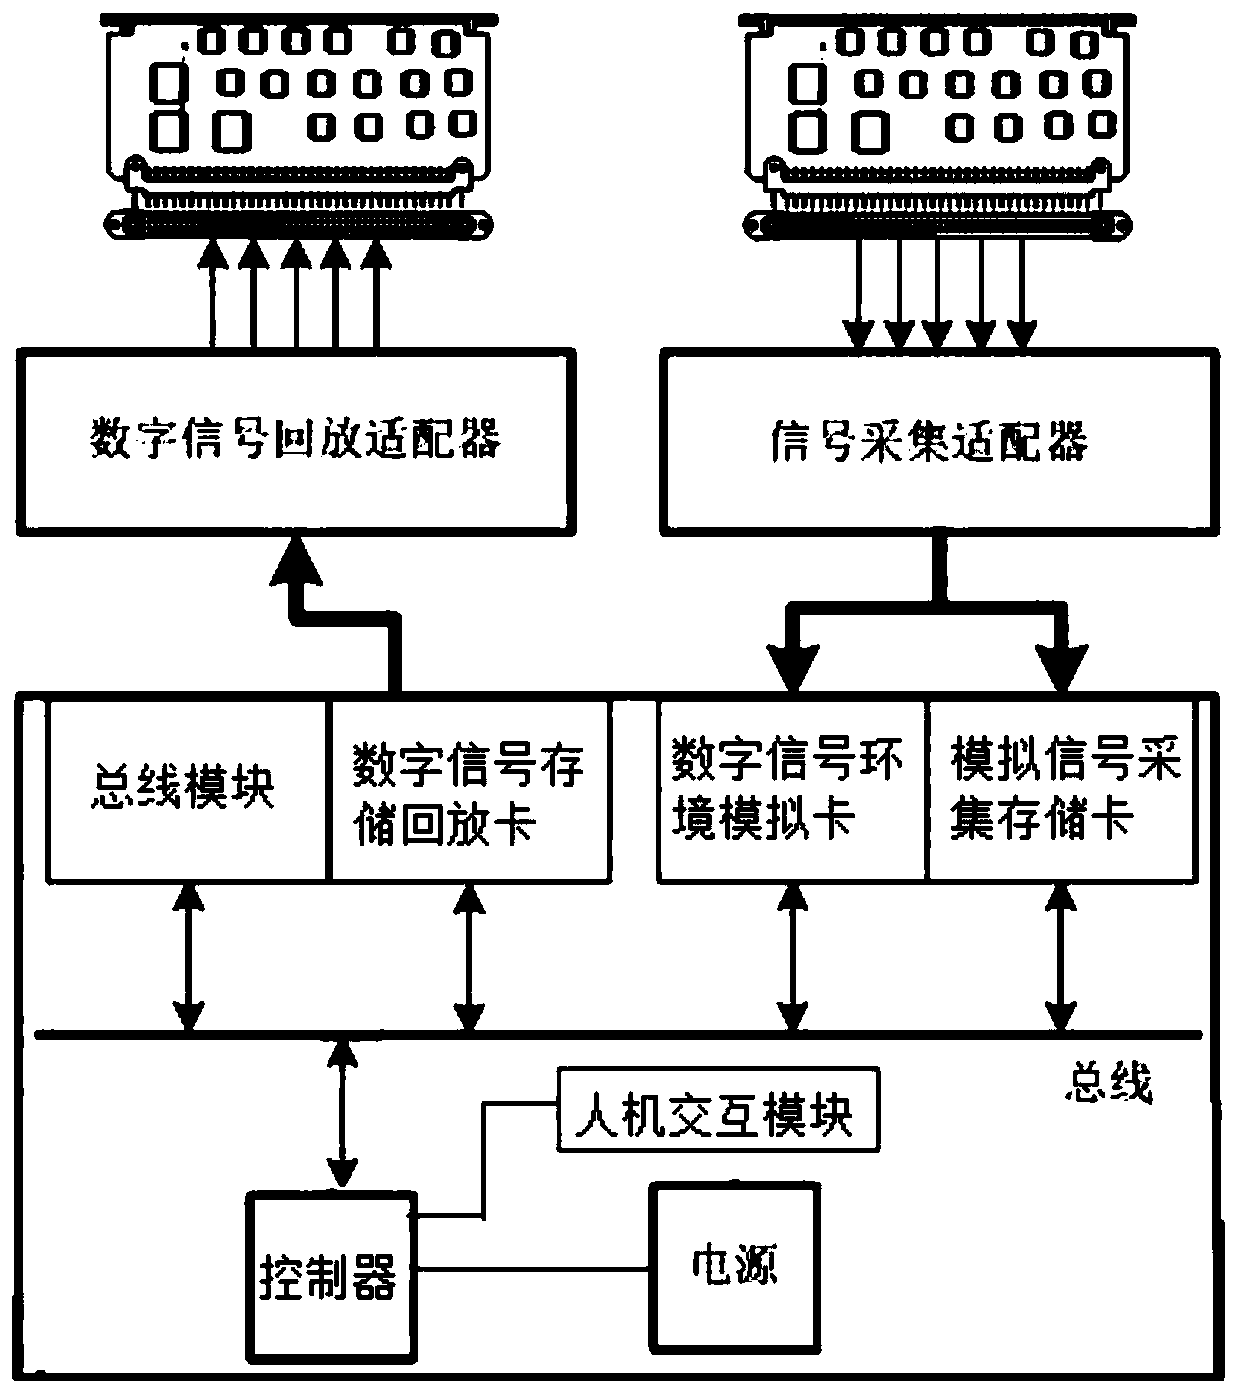 Analog digital signal mixed synchronous acquisition system